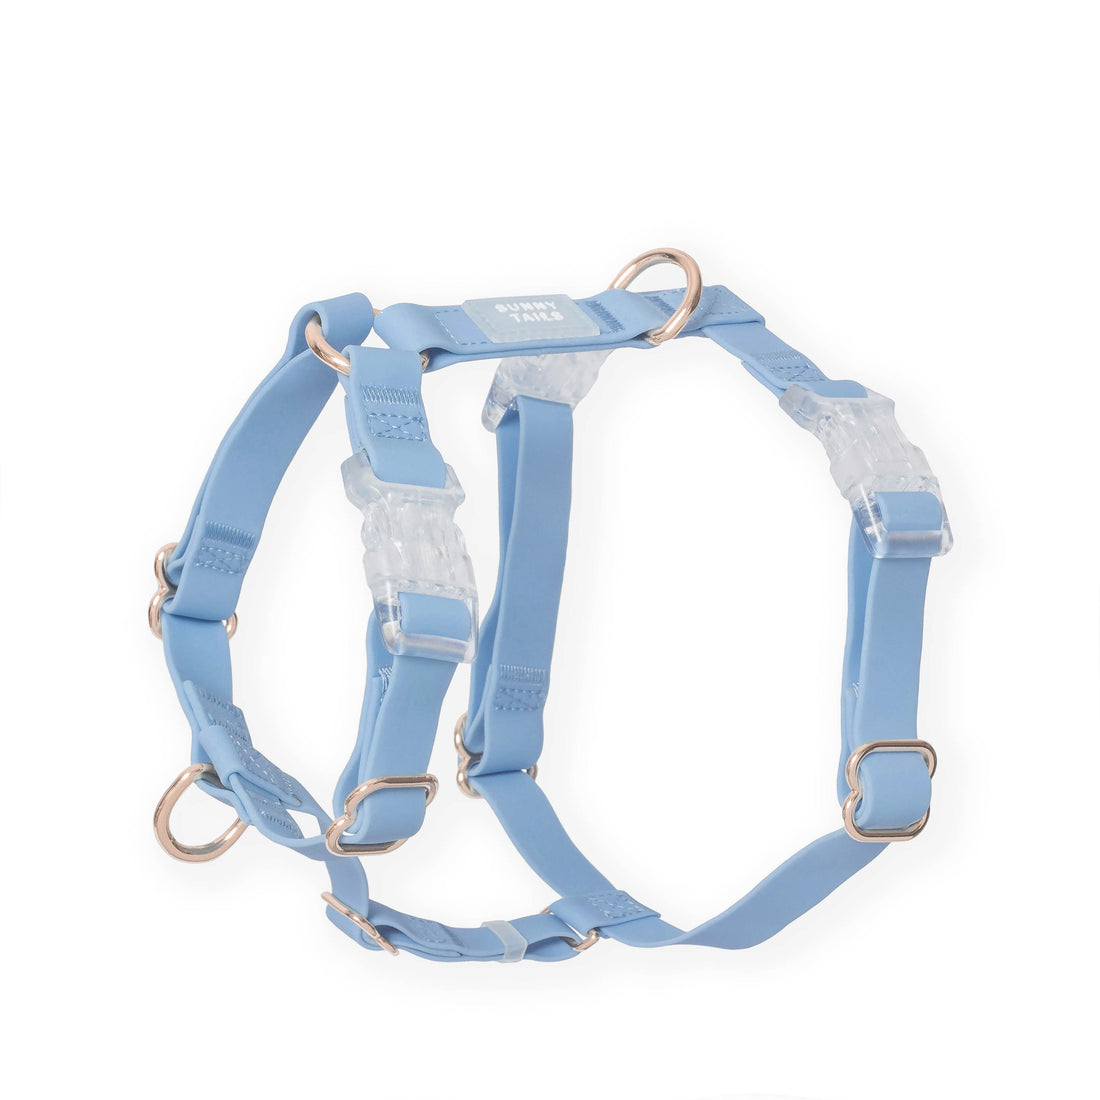 Fur King Ultimate No Pull Harness, Best No Pull Dog Harness